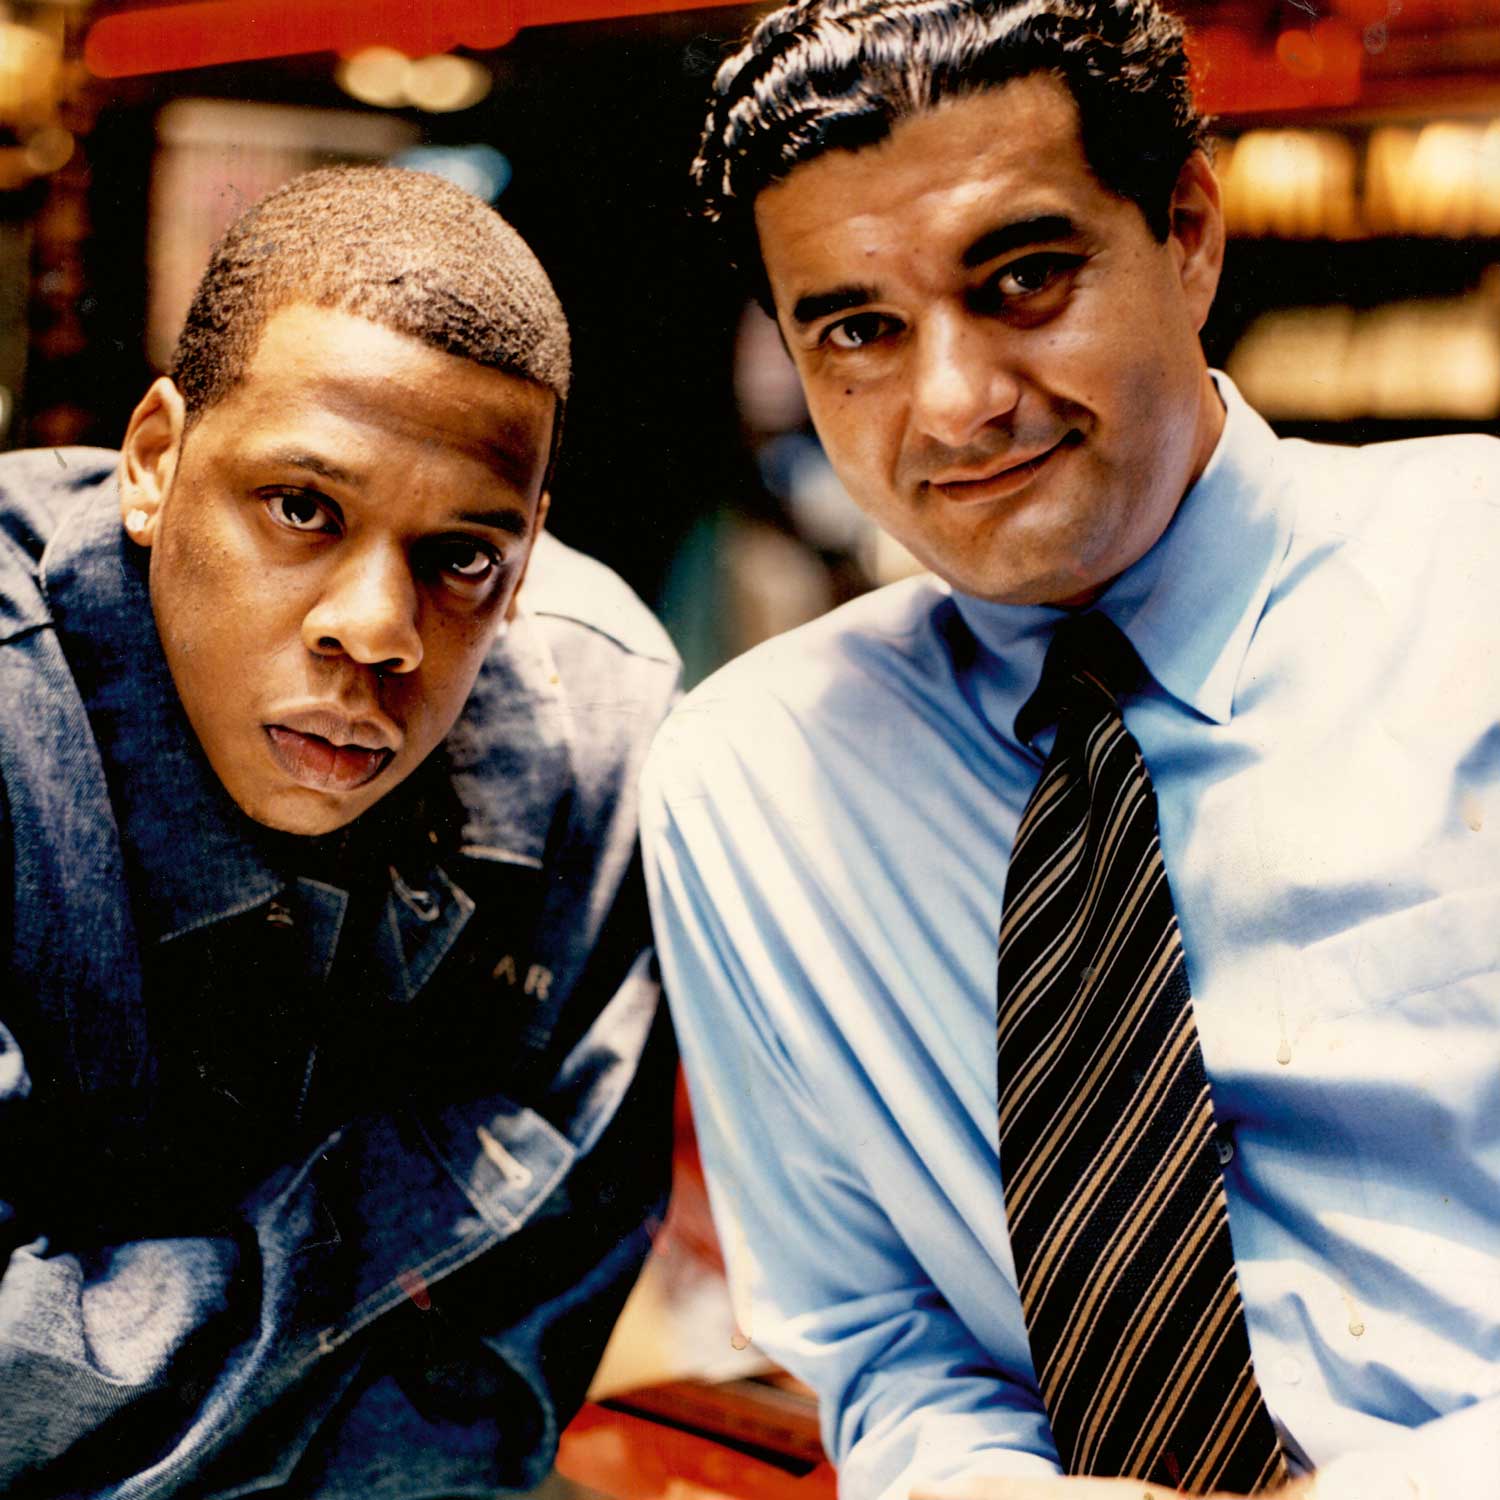 Jacob Arabo's influence on hip-hop style and popular culture is massive. Pictured here with Jay-Z